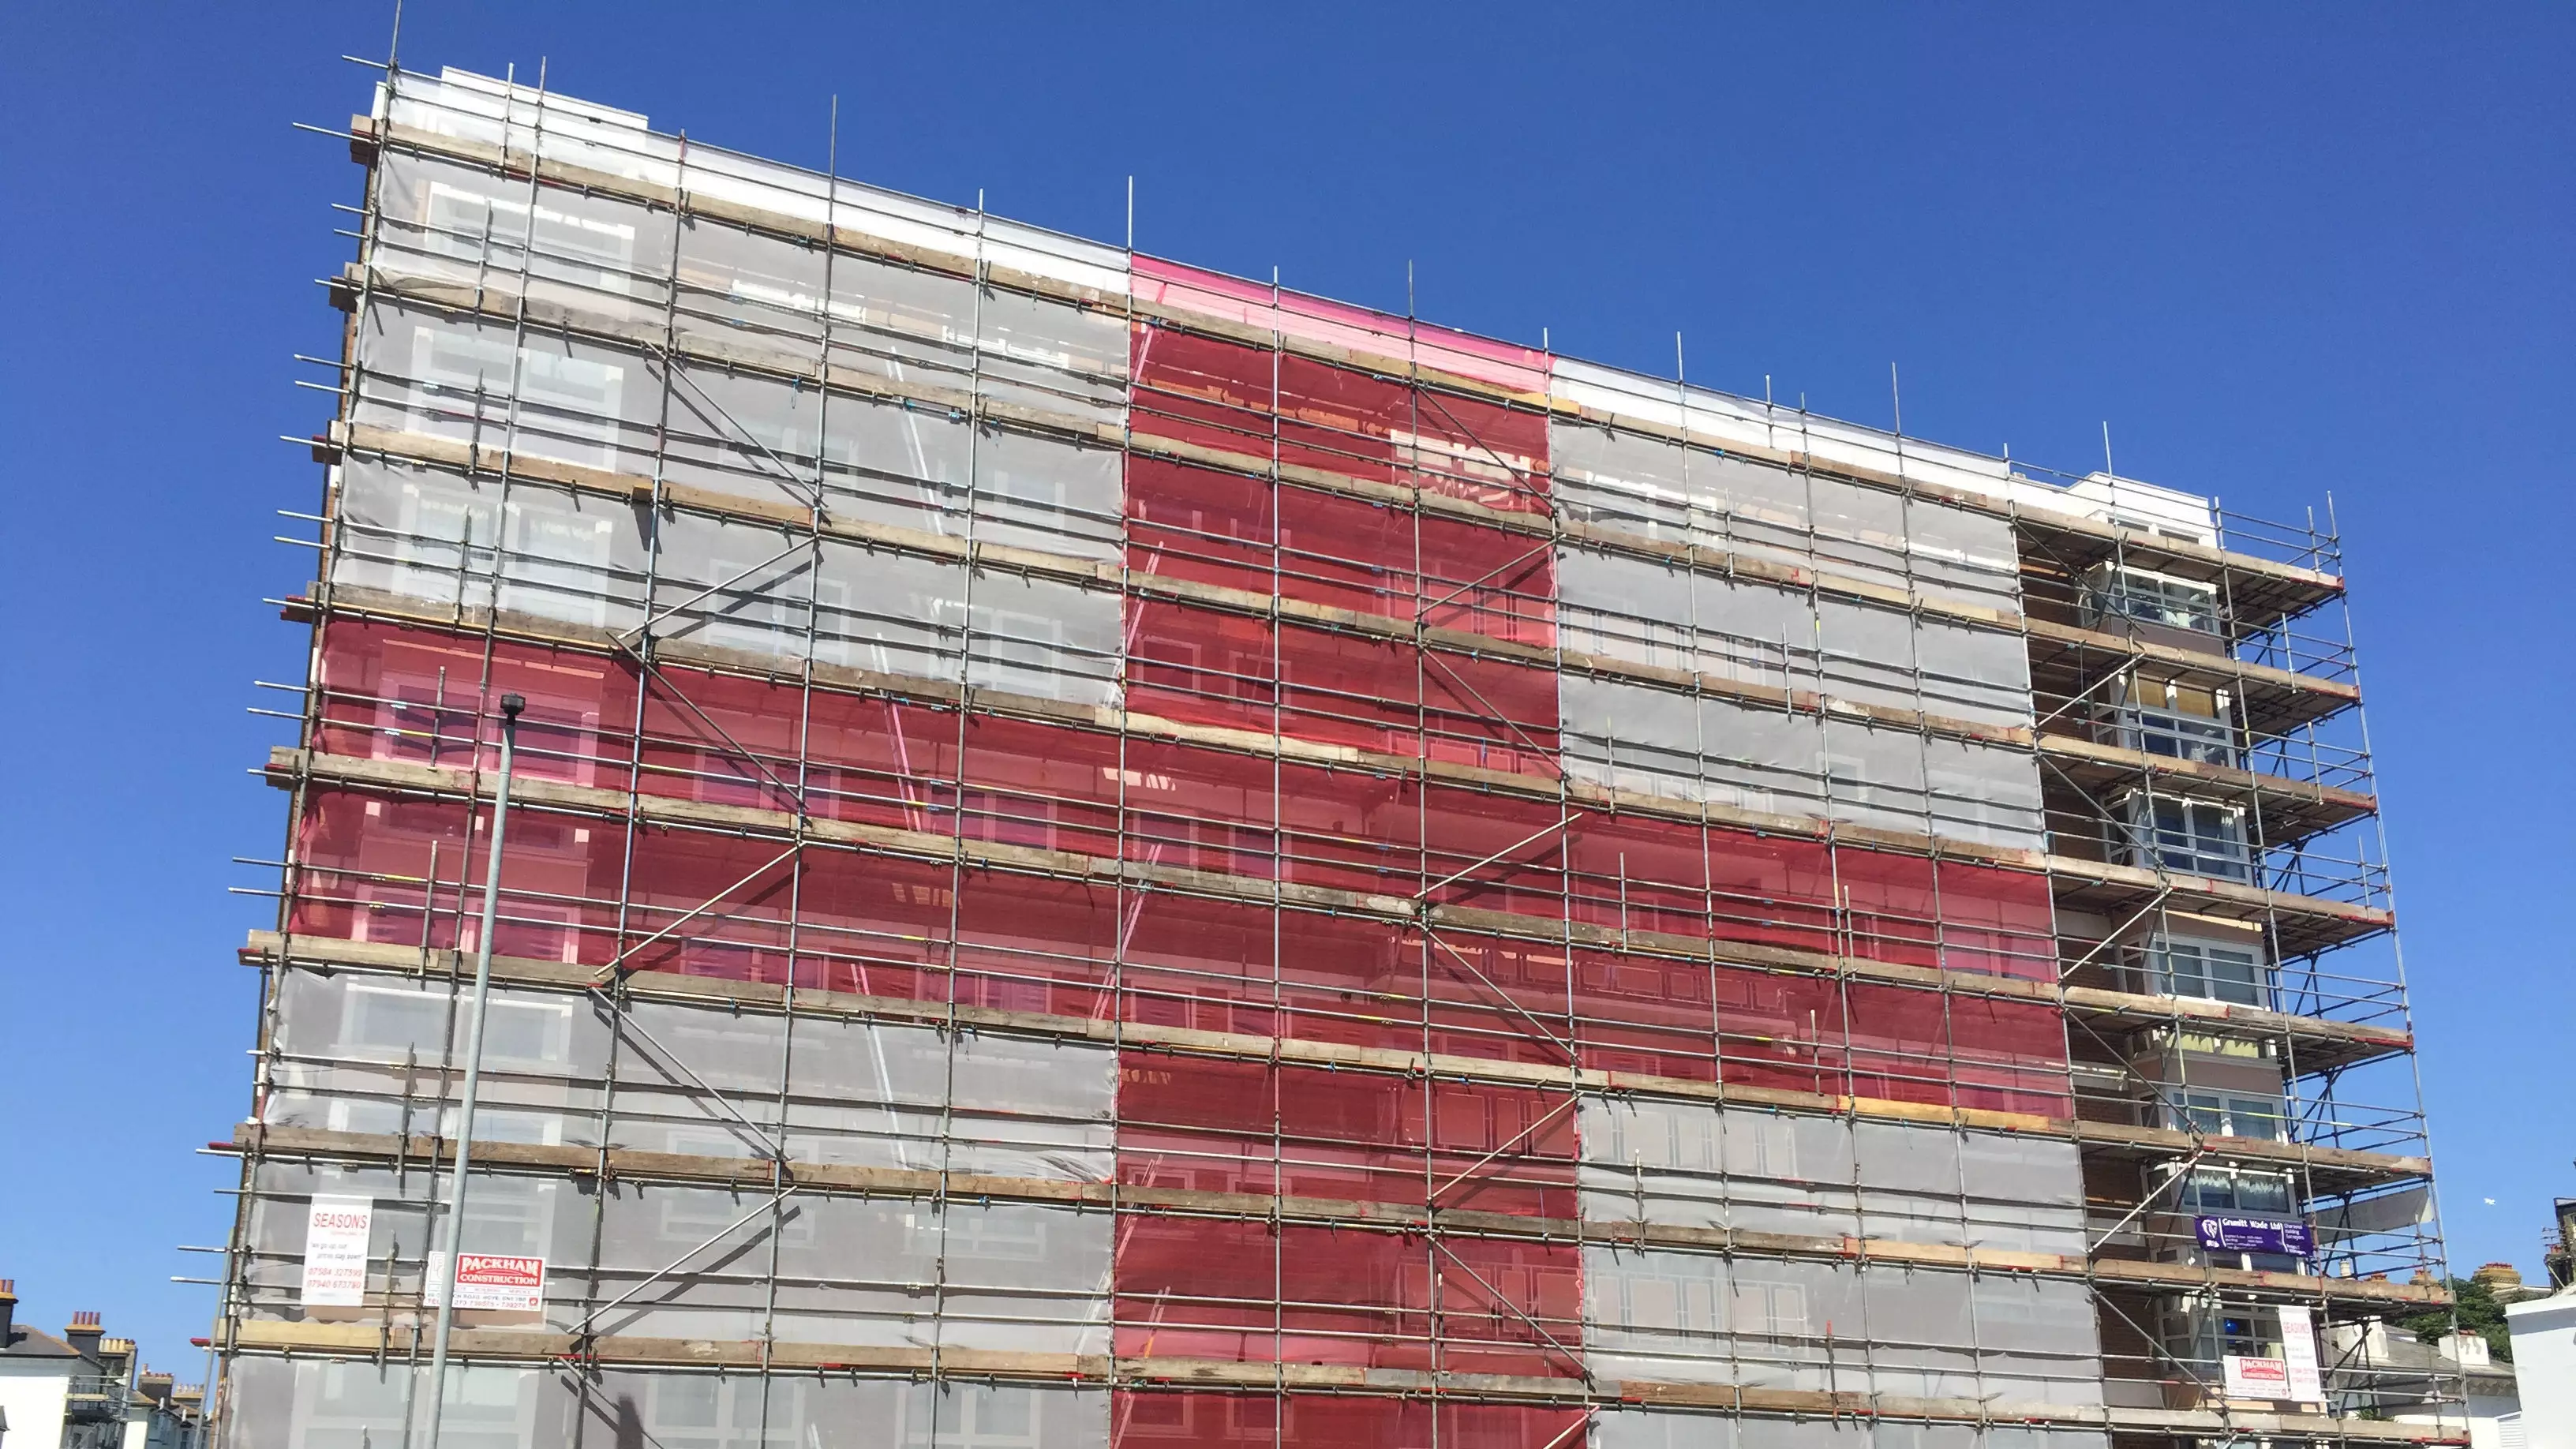 Scaffolders Show Their Pride With A Massive England Flag On Flats